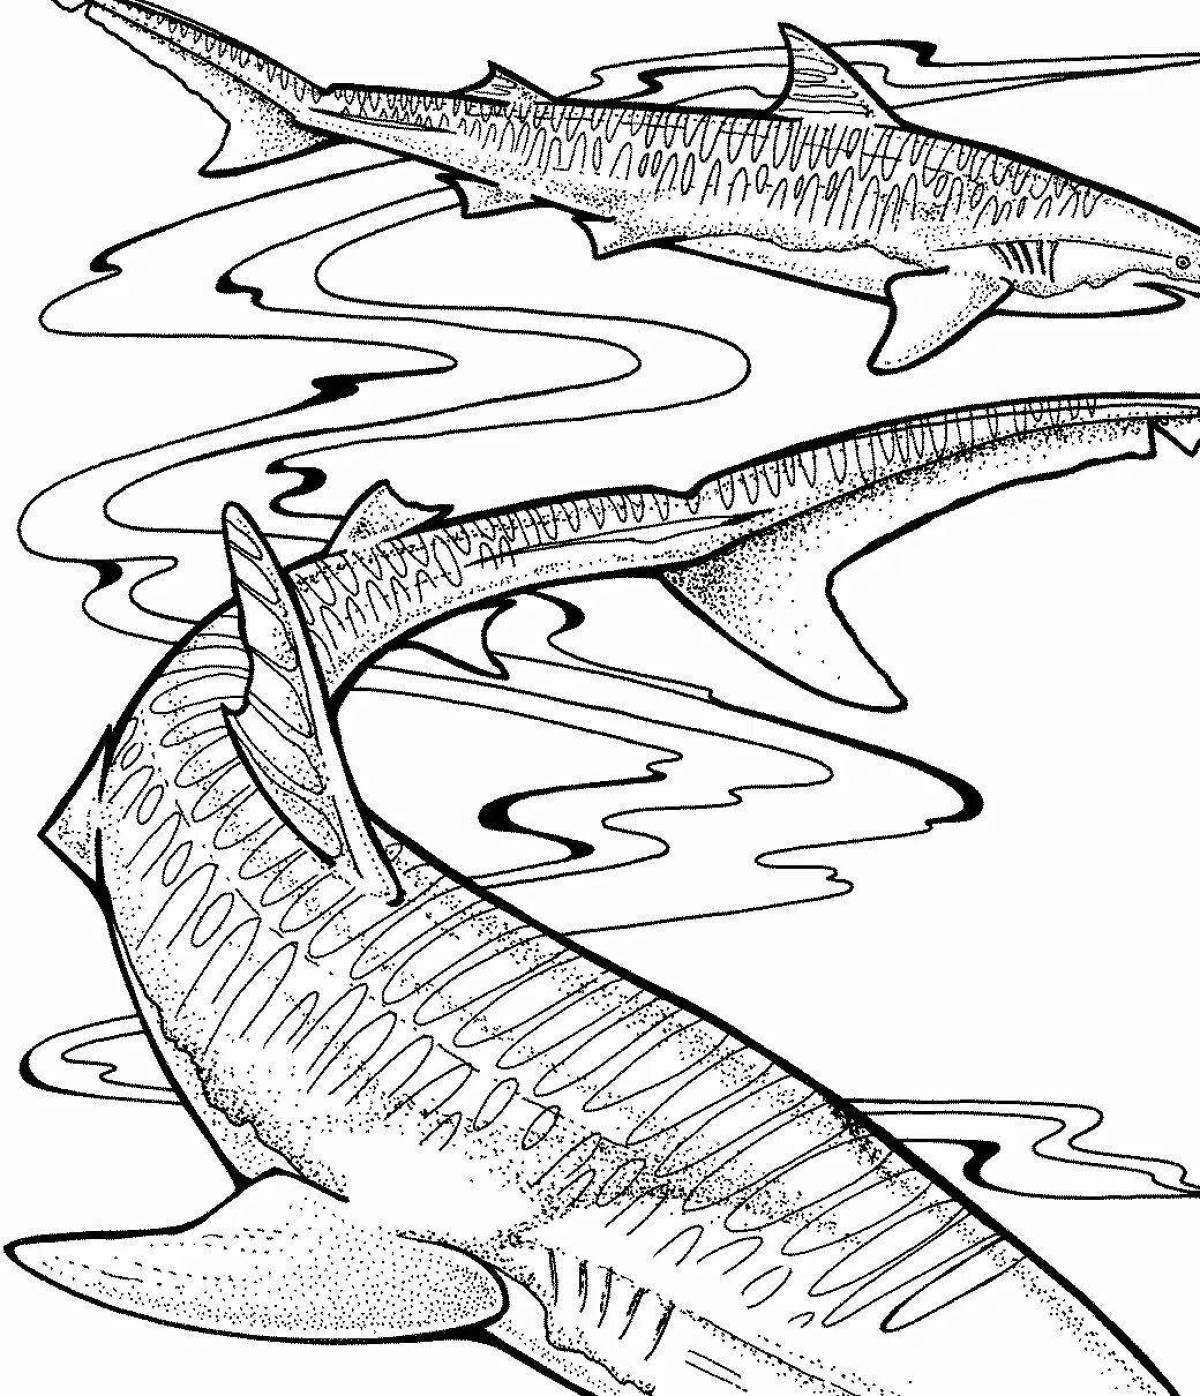 Whale shark wonderful coloring book